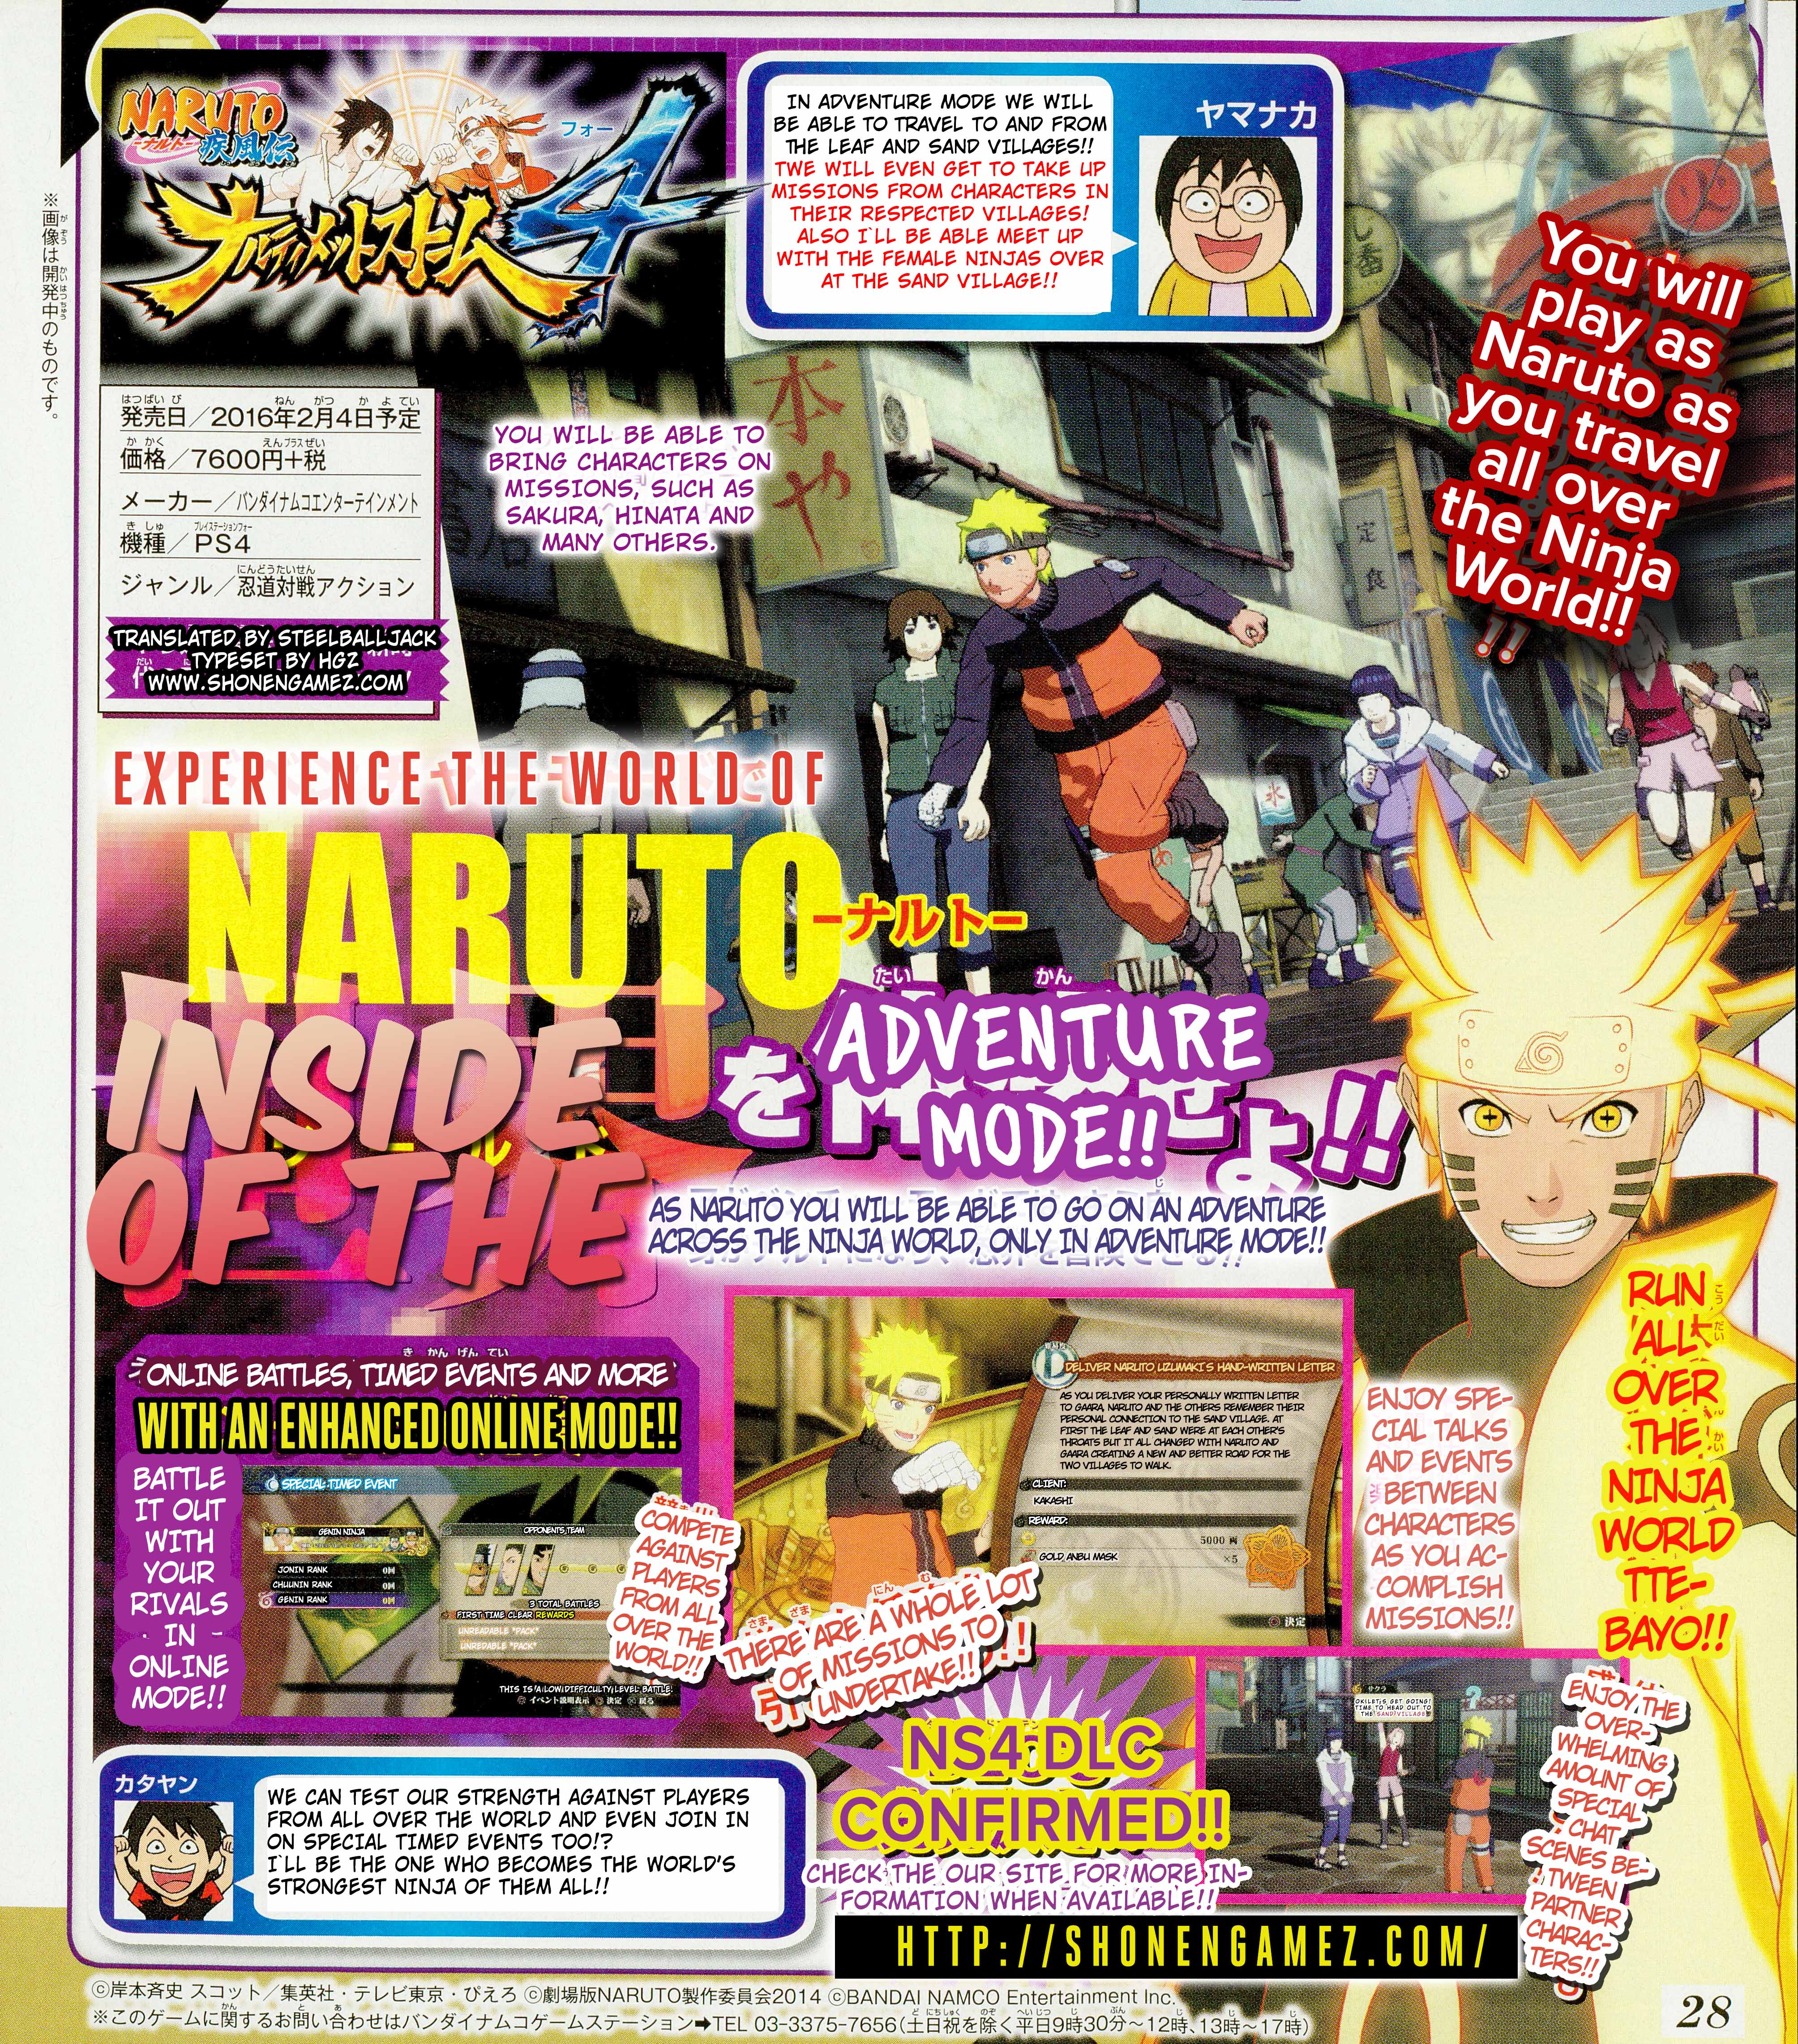 GOD THIS BORUTO STORY MODE SUCKS - Naruto Storm Connections ONLINE